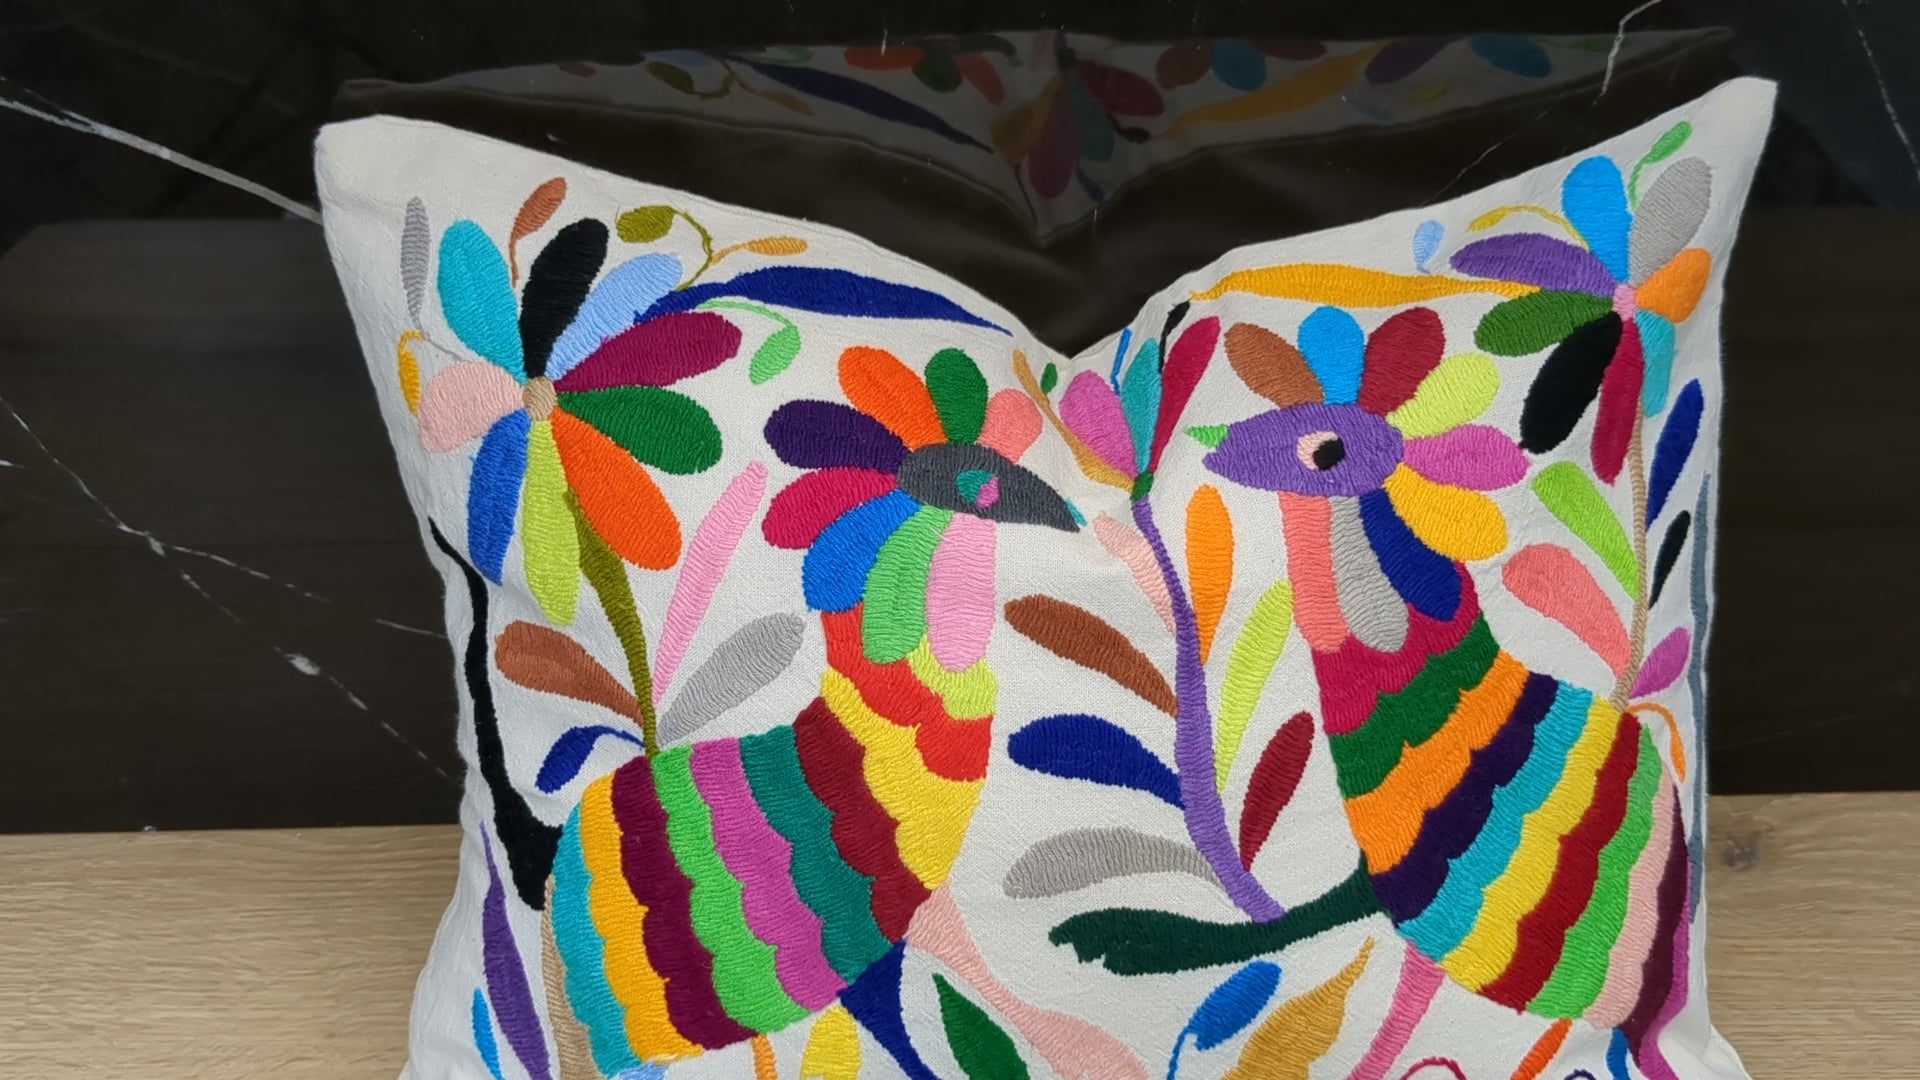 Rectangle Otomi Tenango Pillow Cover with Hand Embroidered Flowers and Animals in Vibrant Colors. Handmade in Mexico. We package and ship from the USA. Buy now at www.felipeandgrace.com.